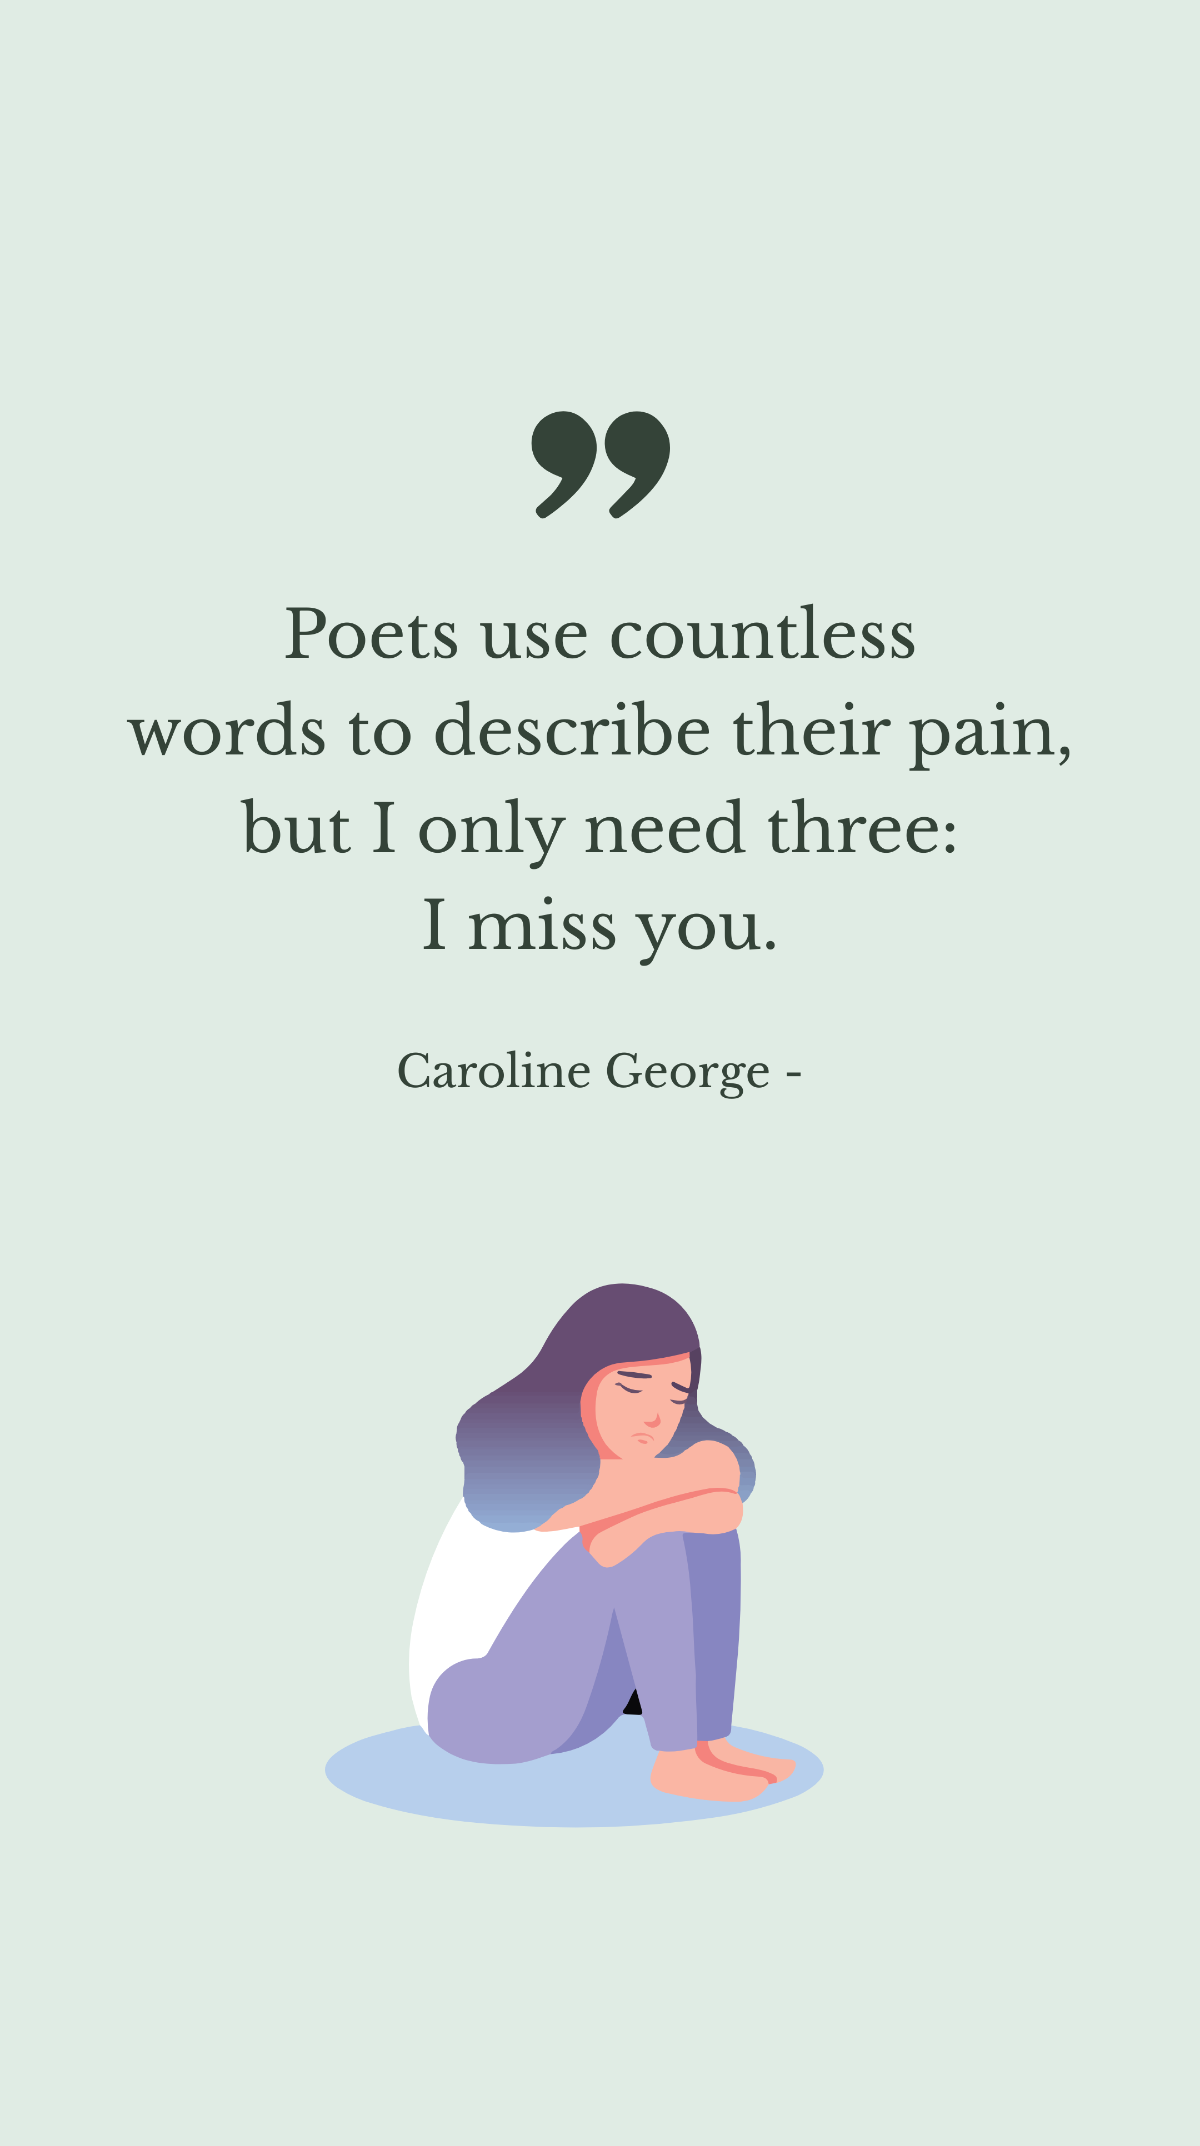 Caroline George - Poets use countless words to describe their pain, but I only need three: I miss you.